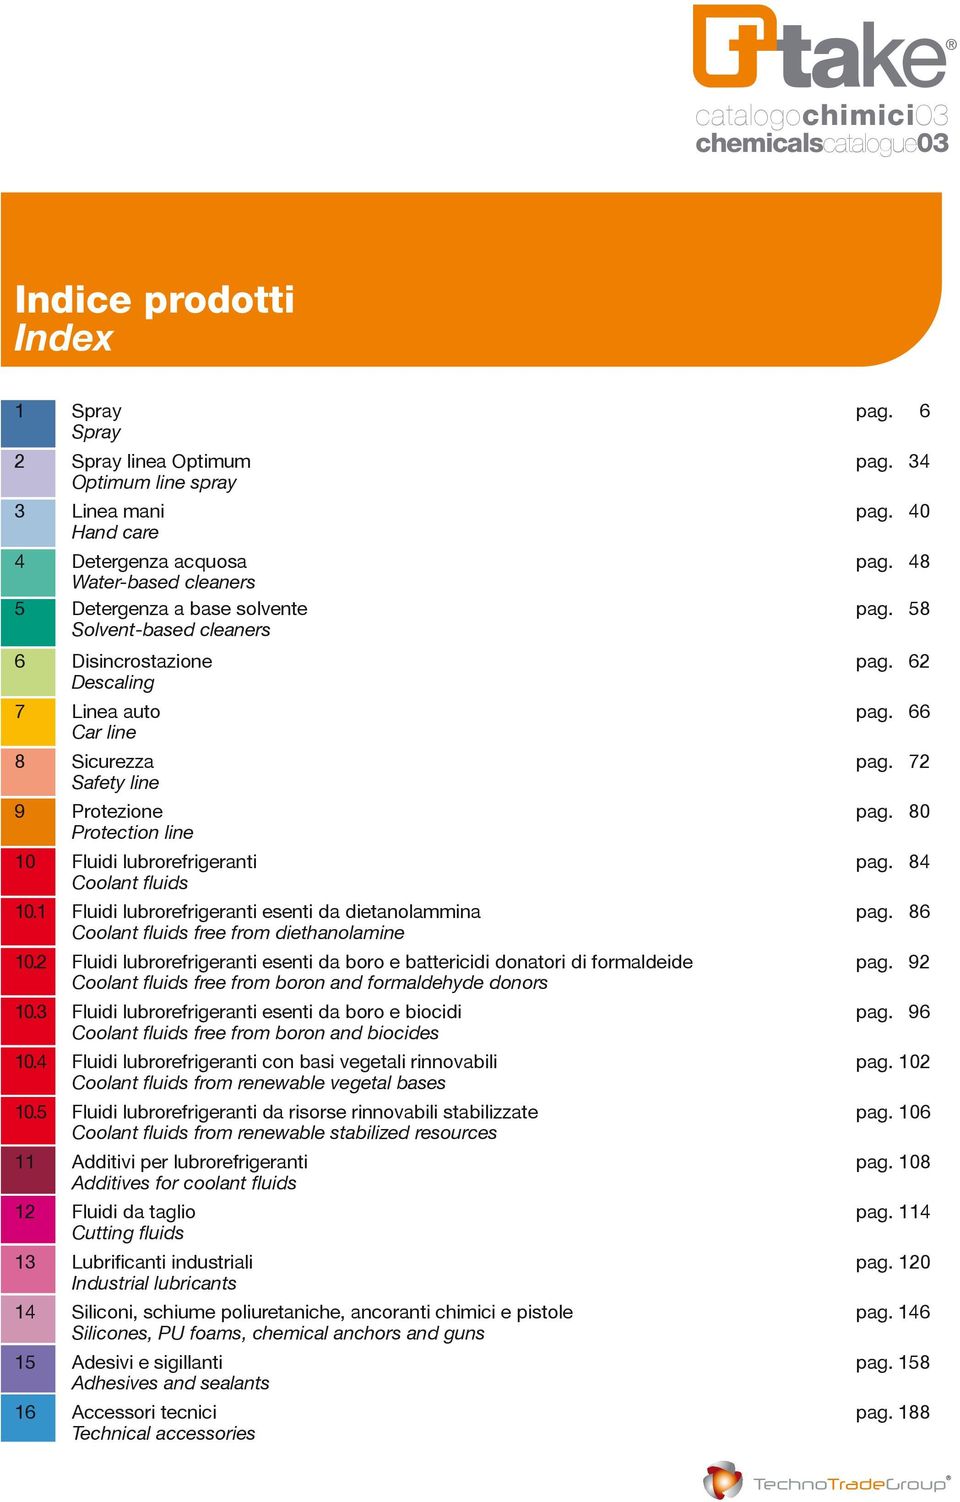 80 Protection line 10 Fluidi lubrorefrigeranti pag. 84 Coolant fluids 10.1 Fluidi lubrorefrigeranti esenti da dietanolammina pag. 86 Coolant fluids free from diethanolamine 10.